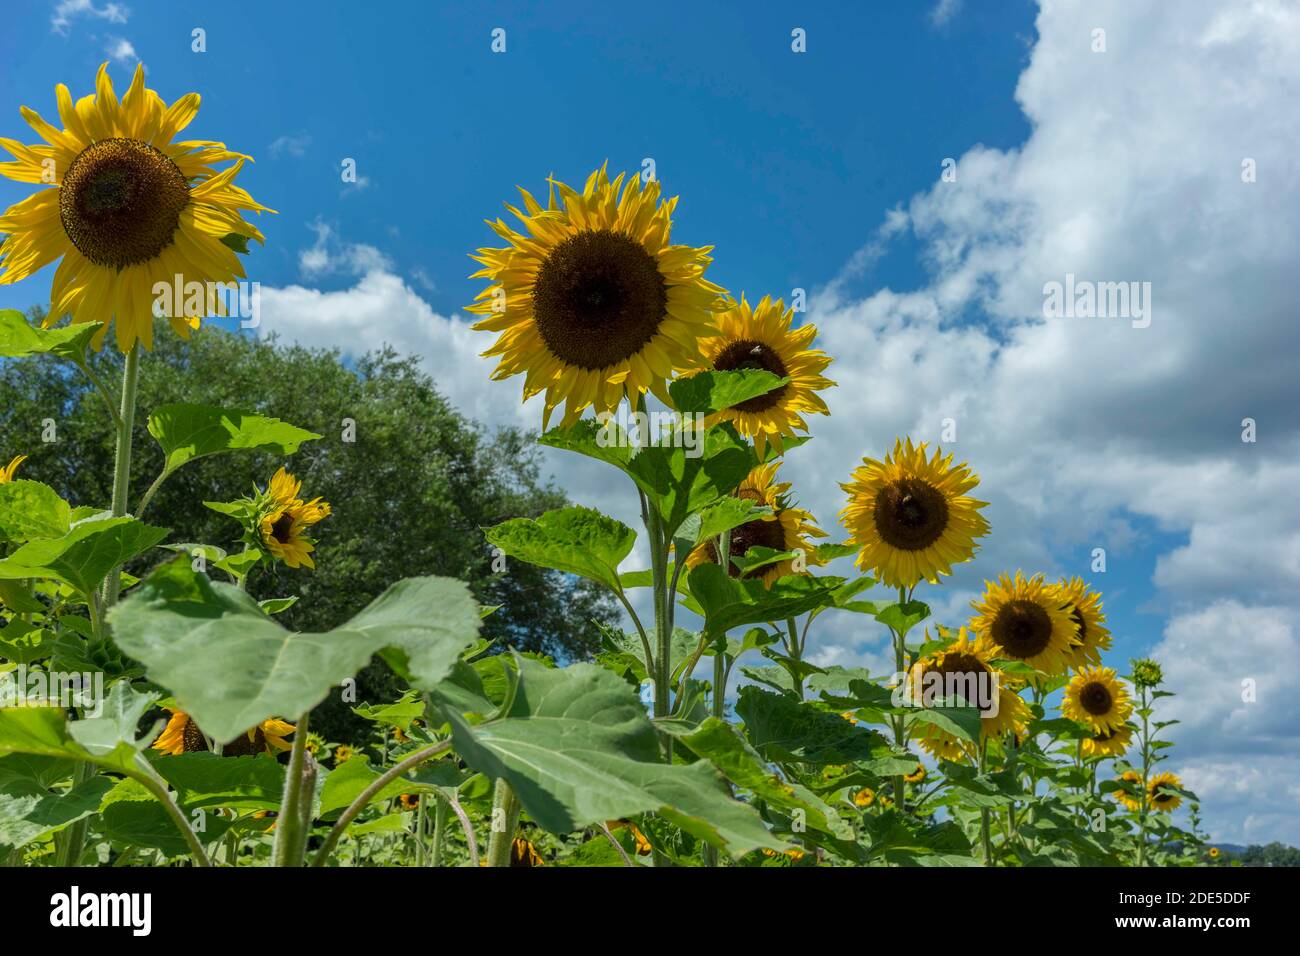 Very beautiful sunflowers against blue sky with clouds Stock Photo